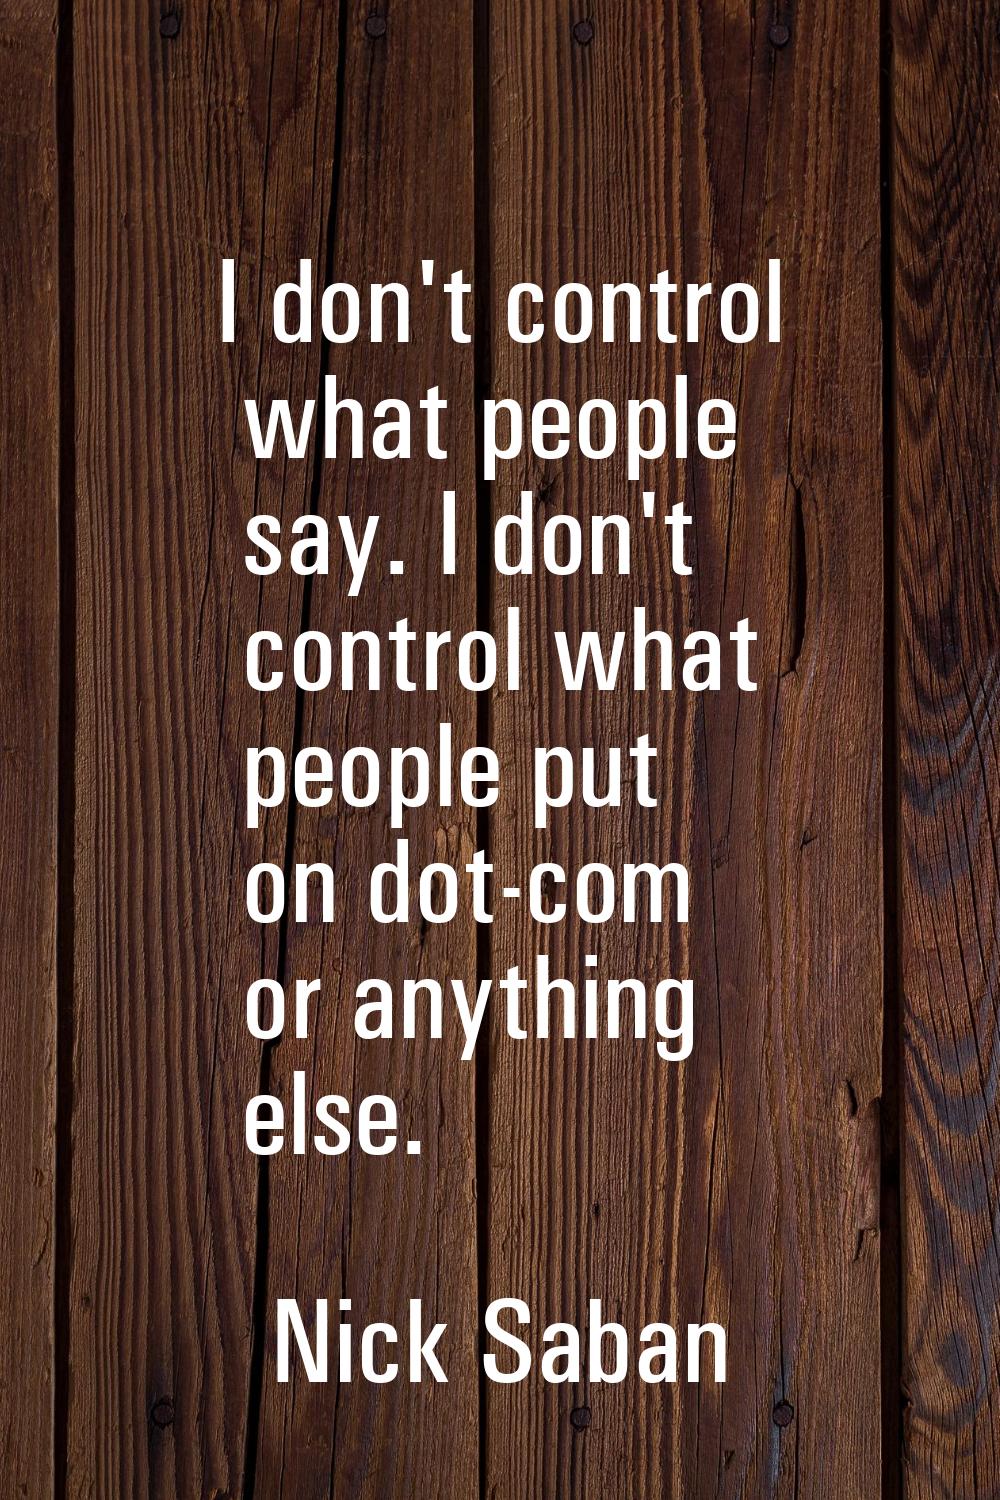 I don't control what people say. I don't control what people put on dot-com or anything else.